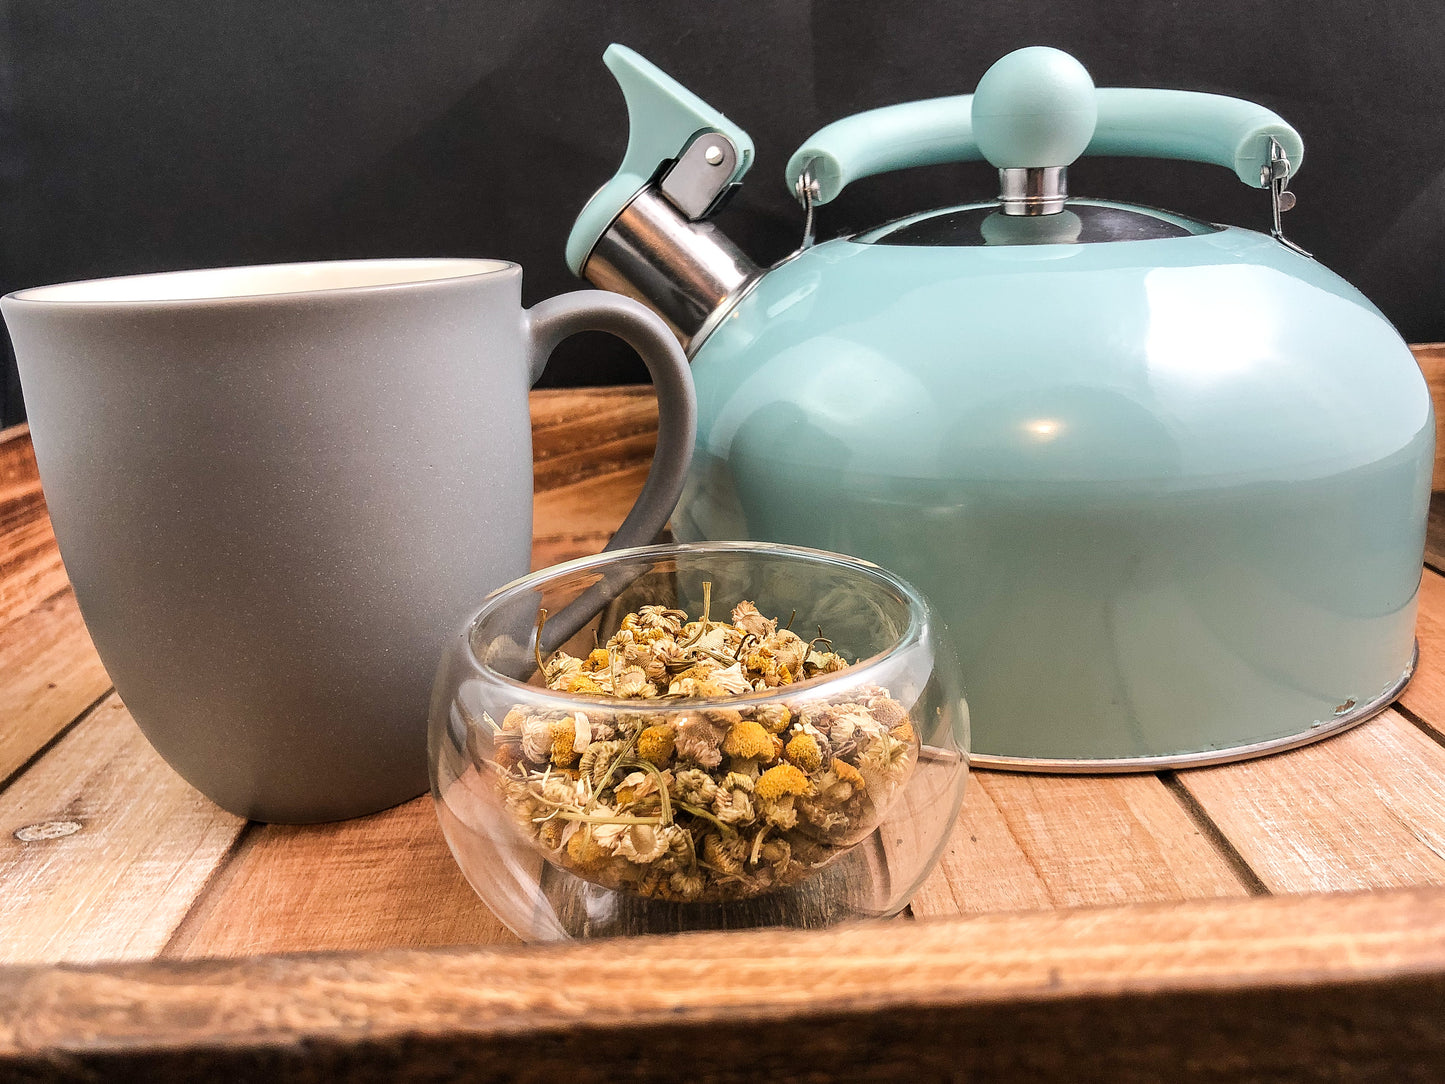 clear small bowl of dried chamomile in forefront with grey mug to left and teal colored tea pot to the right on a wooden table with a black background